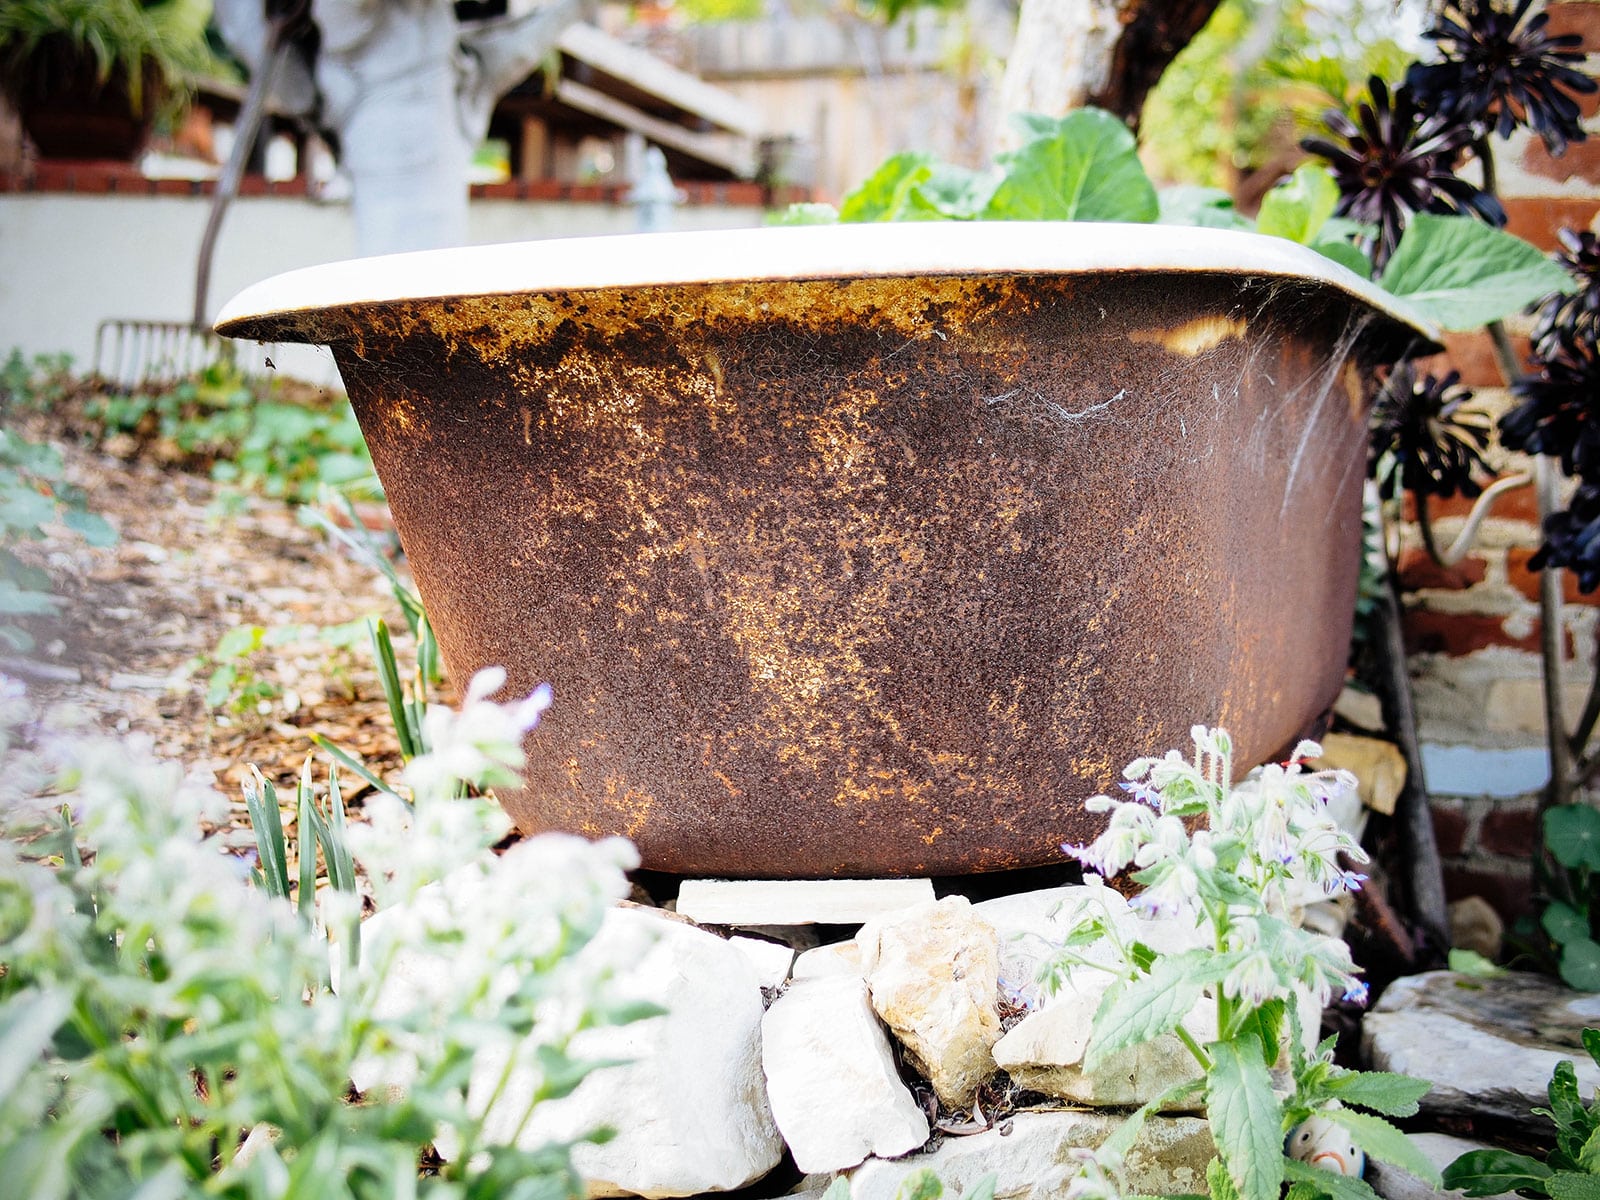 Close-up of rusted patina on a vintage cast-iron bathtub planter in a garden